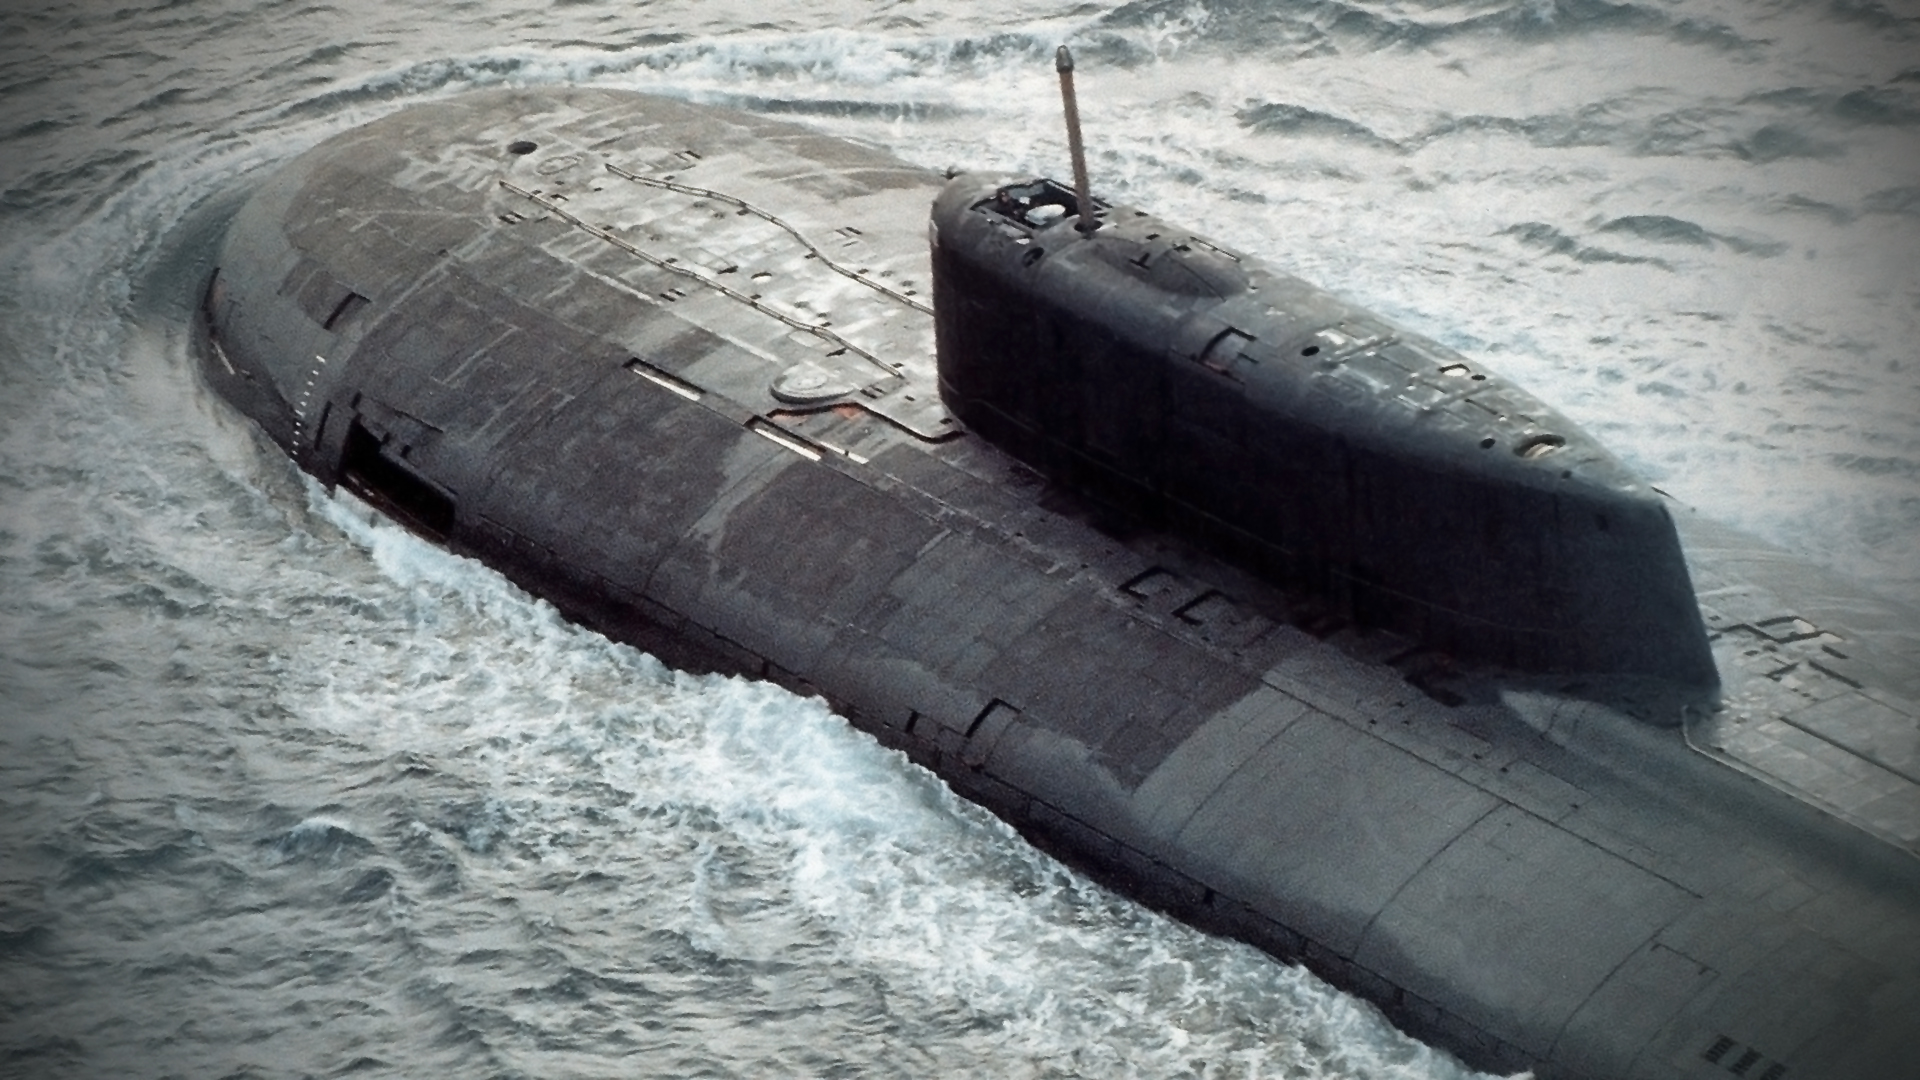 Russia’s Massive Arctic “Research” Submarine Will Be The World’s Longest